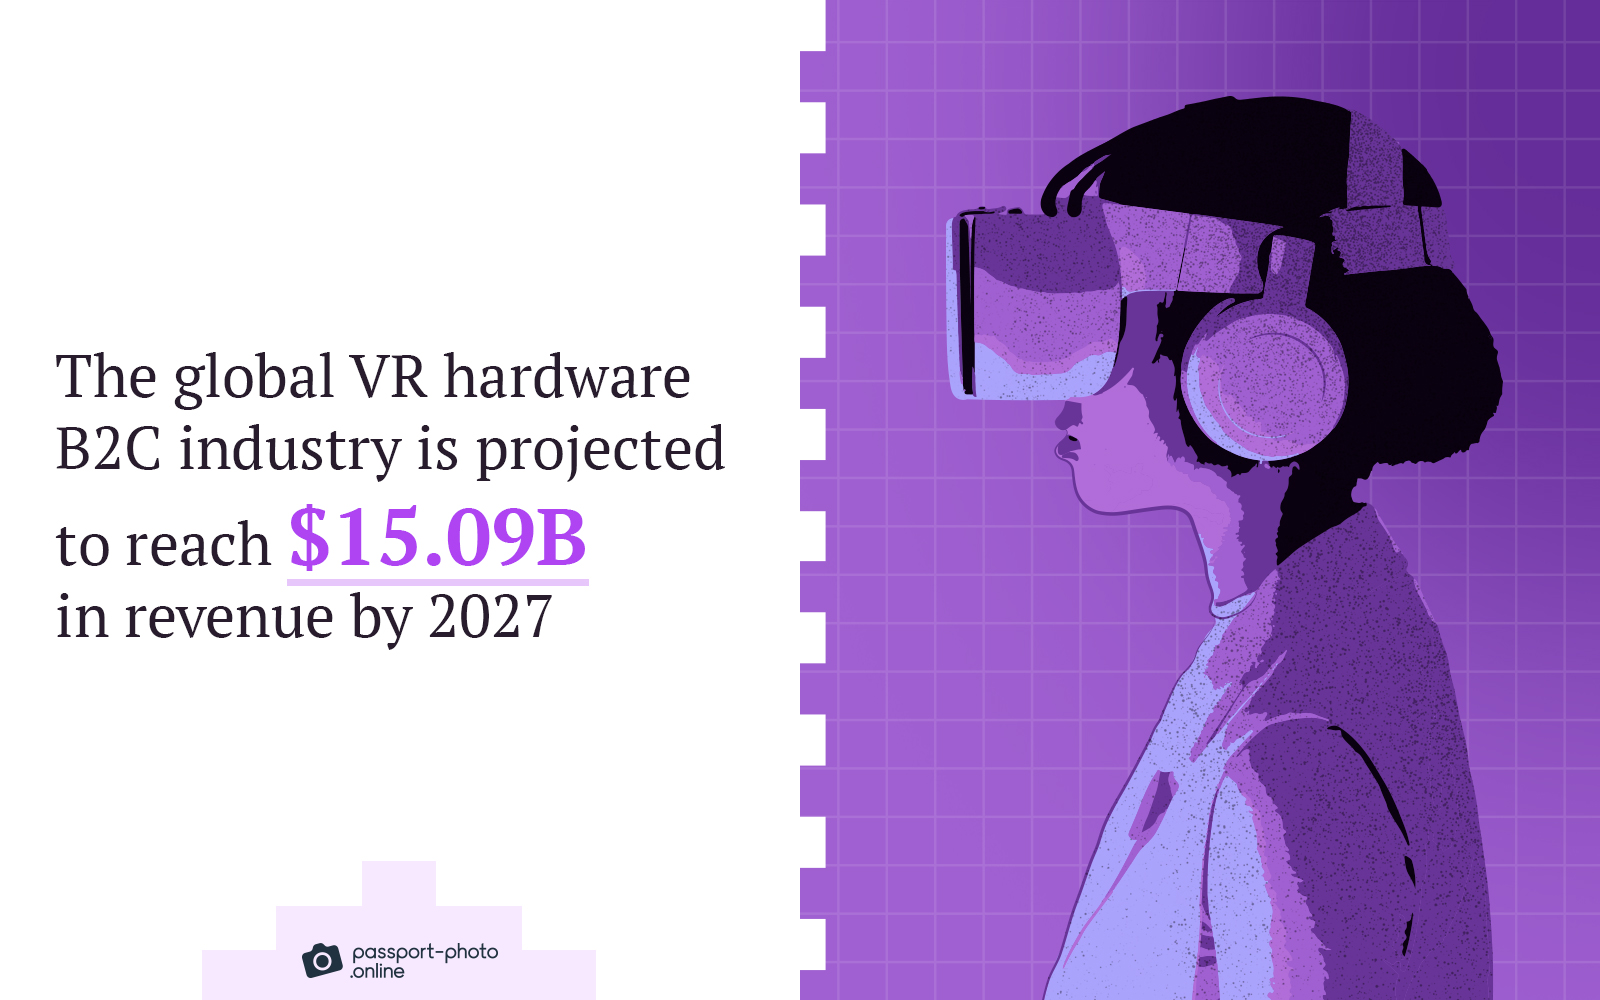 the global VR hardware B2C industry is projected to reach $15.09B by 2027